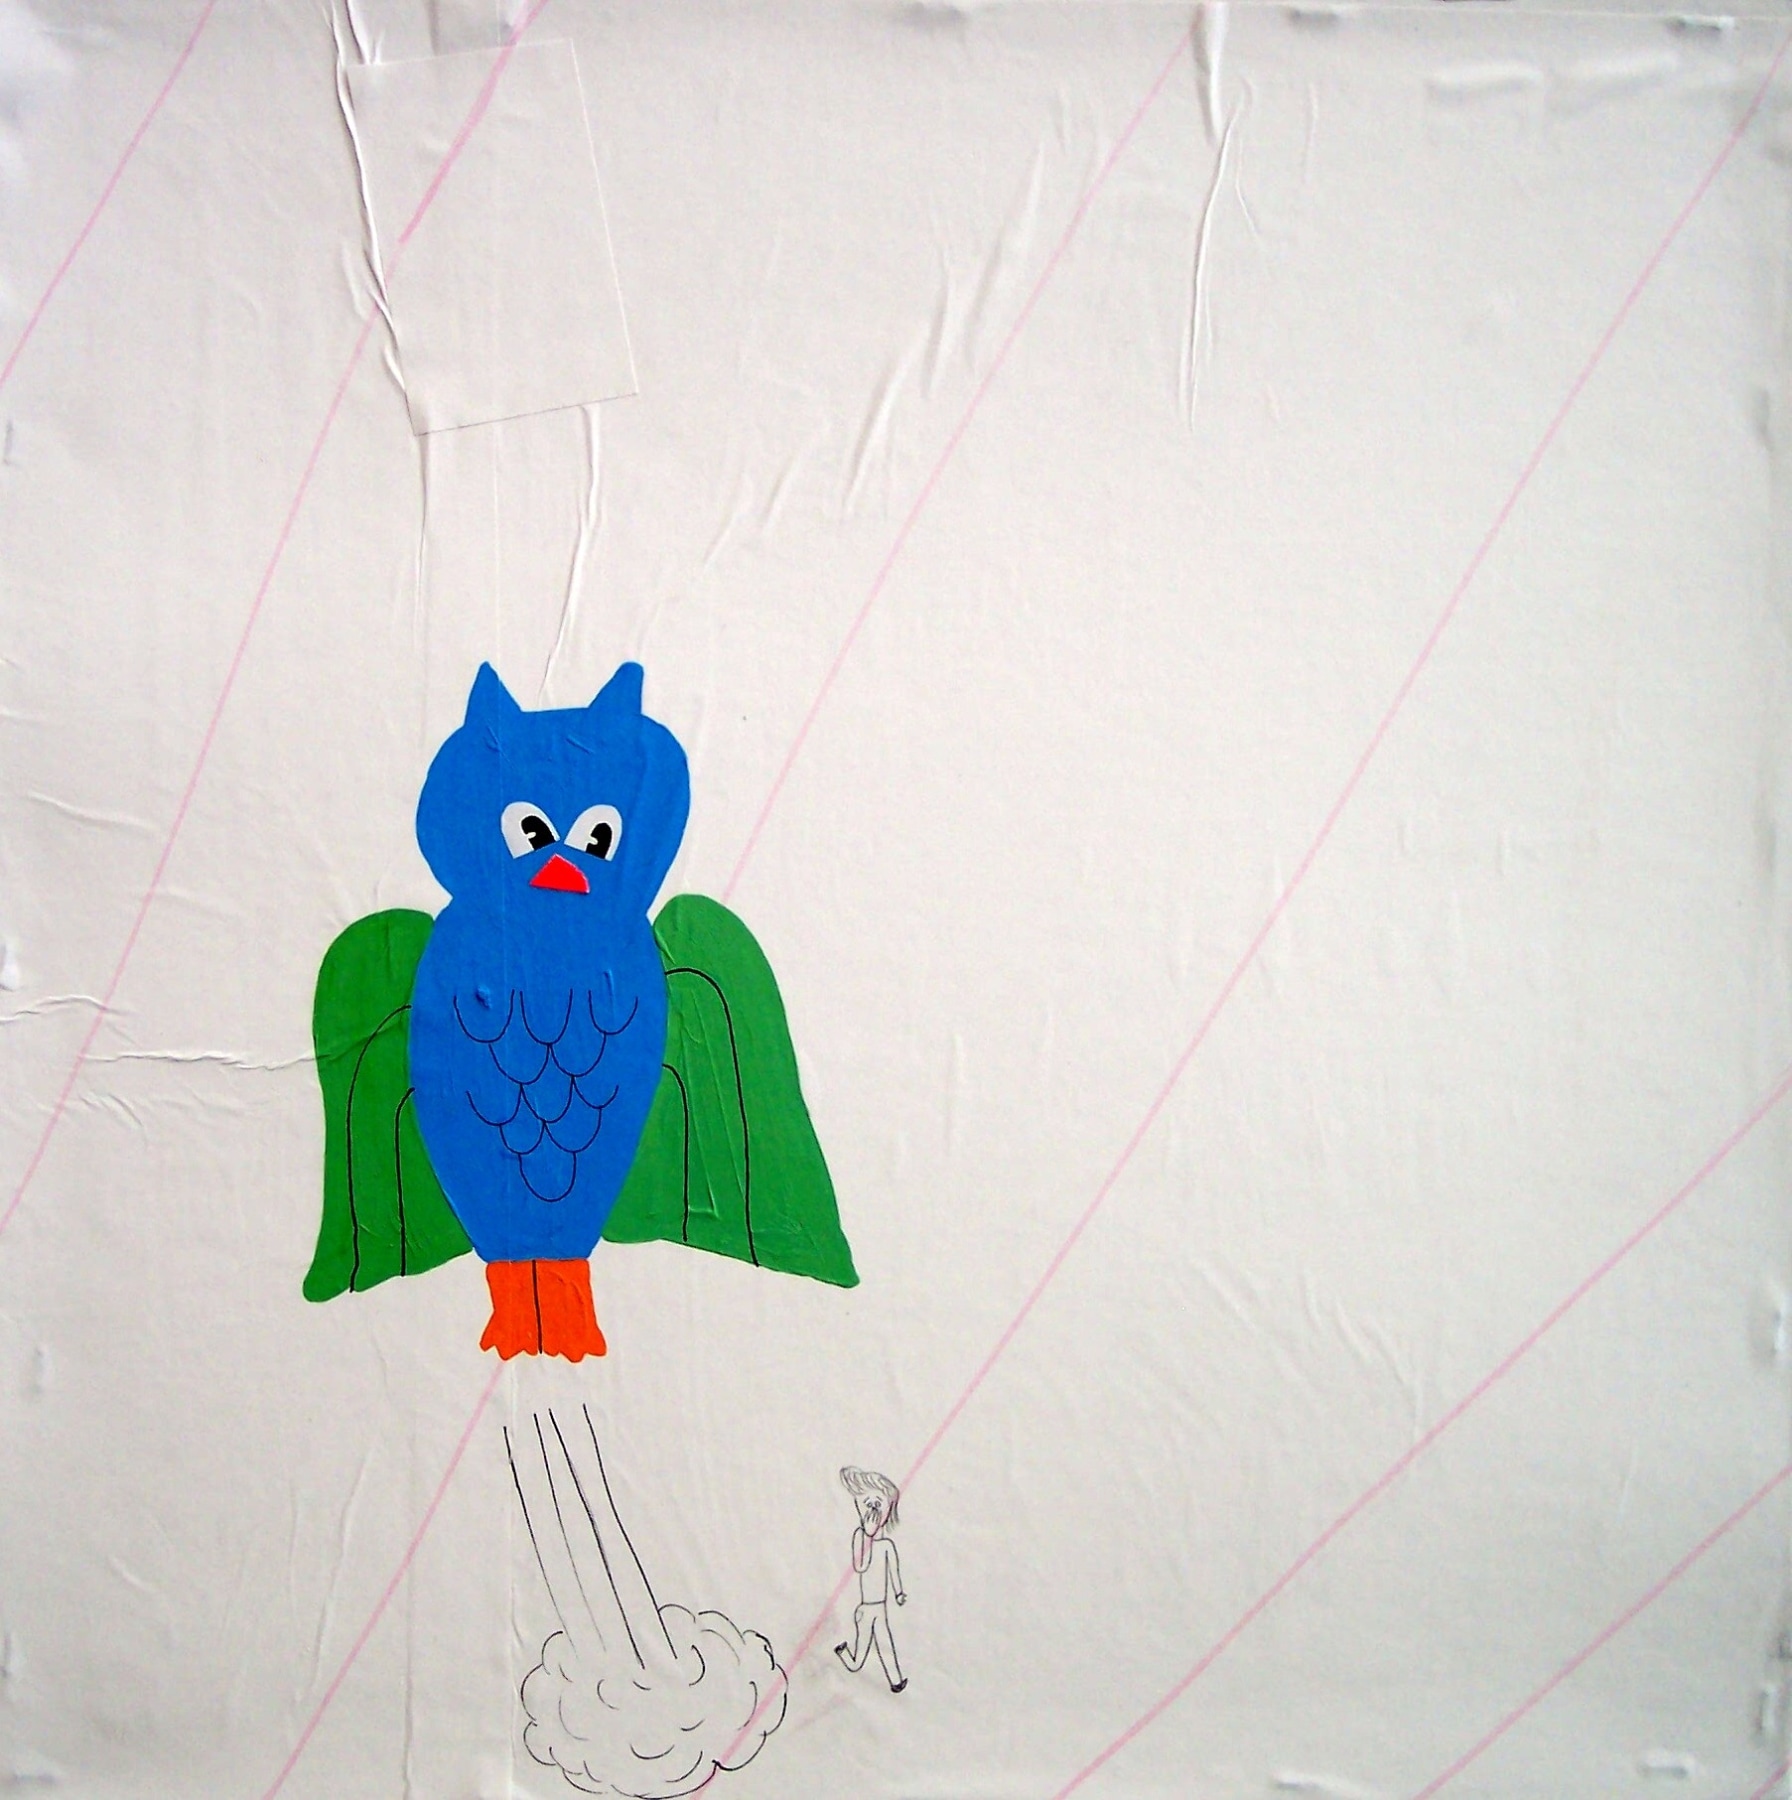 Blue painted owl next to small man